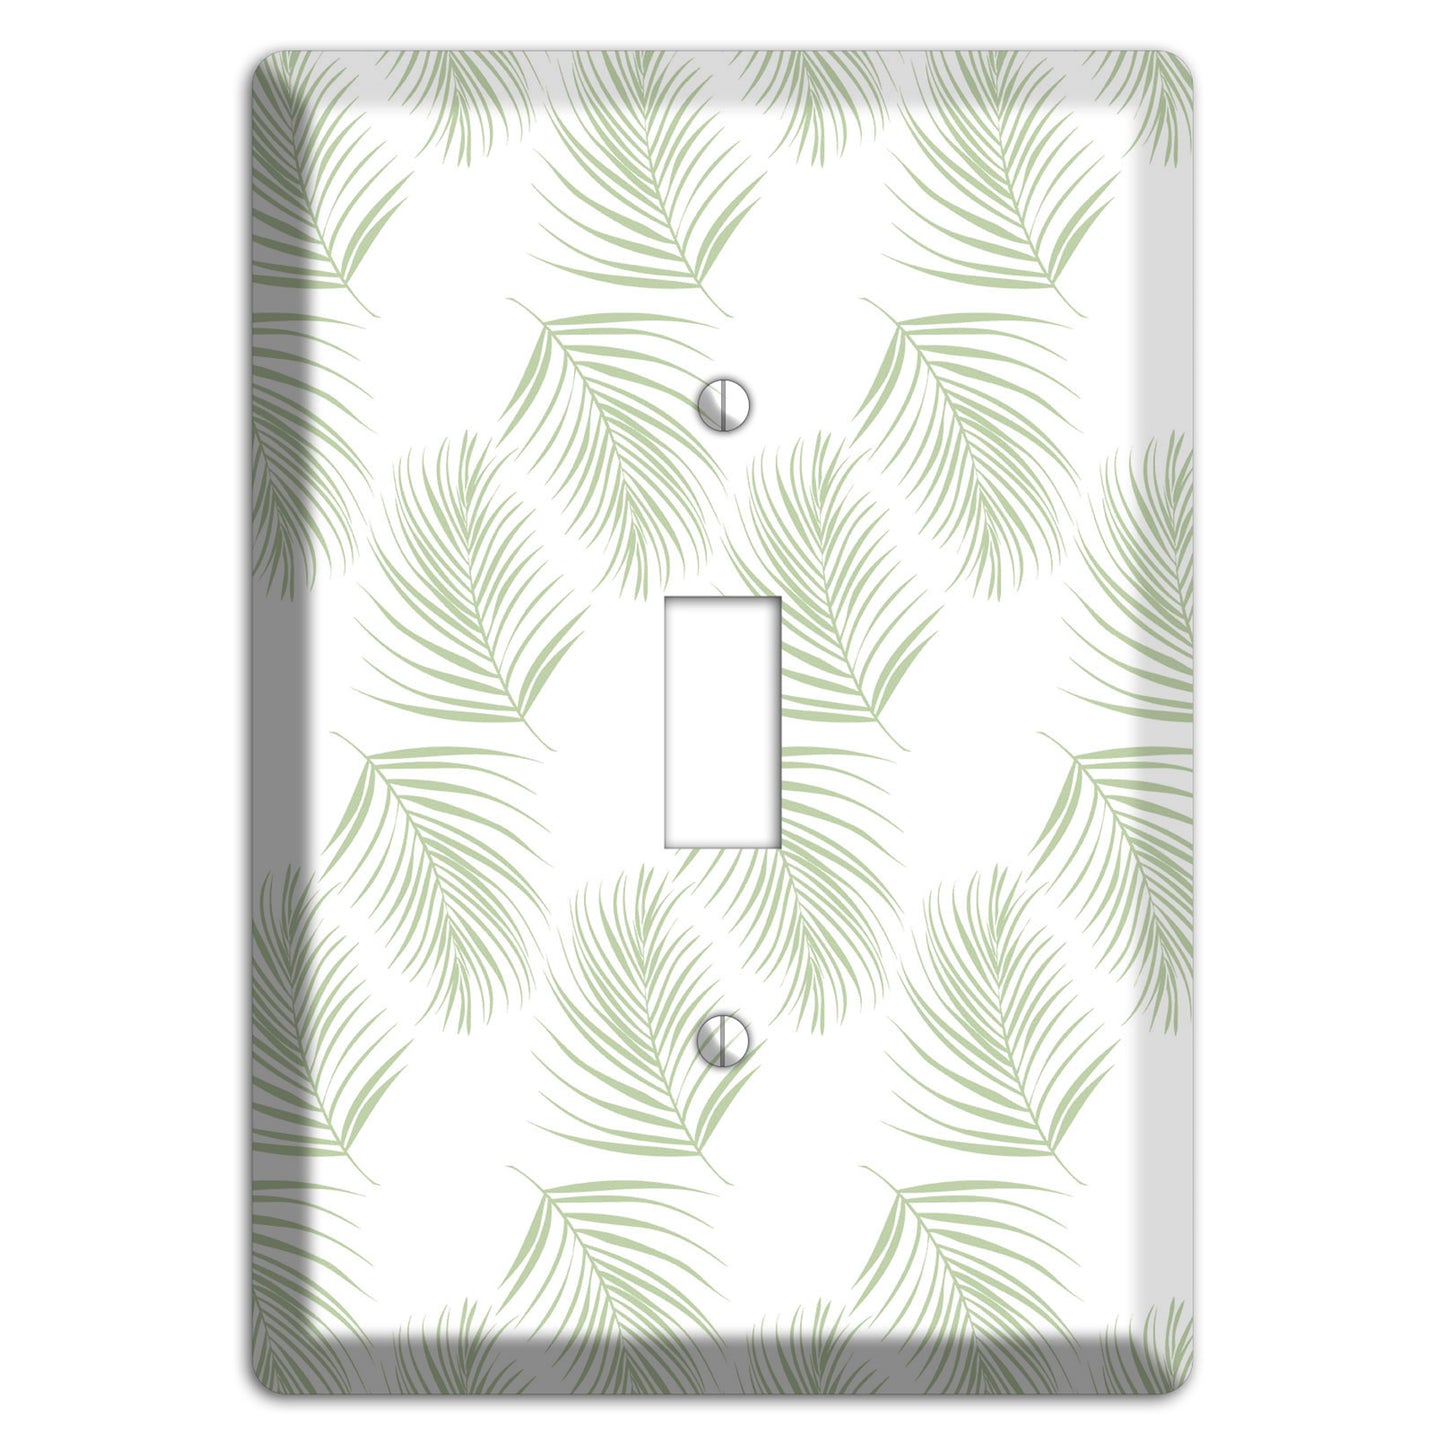 Leaves Style GG Cover Plates